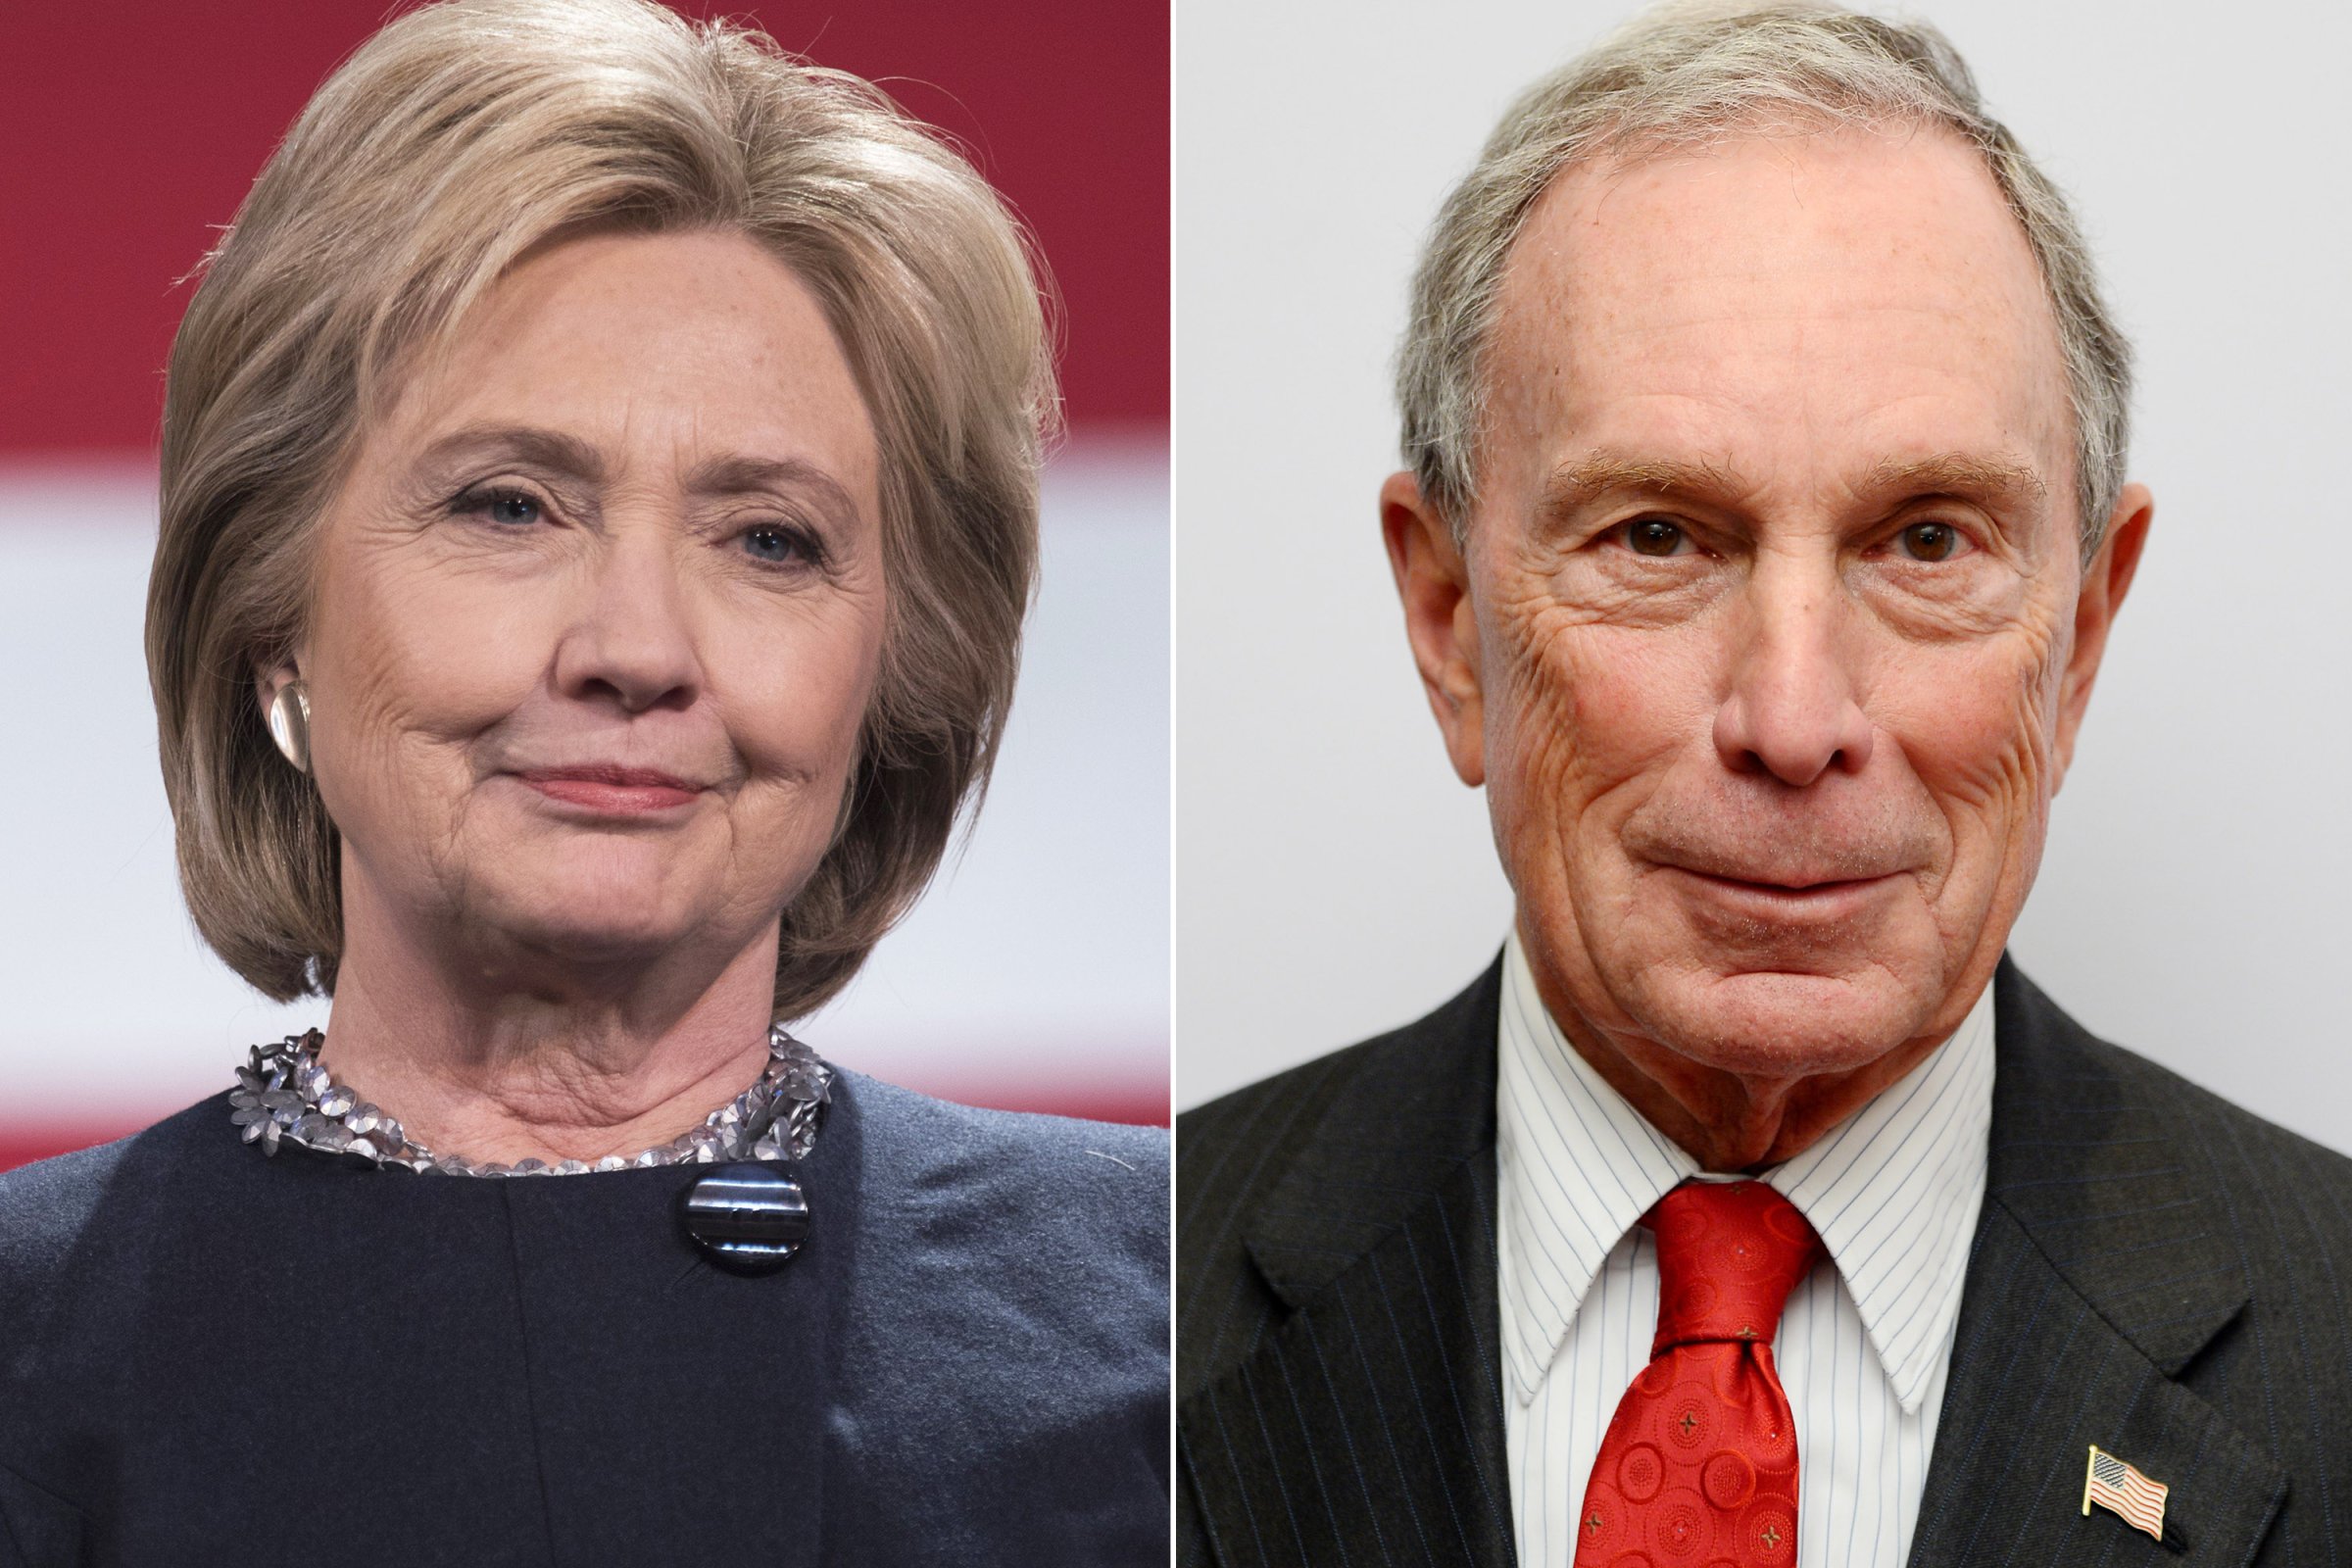 LeftHillary Clinton speaking during a campaign stop at the Rochester Opera House in Rochester, NH on January 22, 2016. Right Michael Bloomberg attends Jazz at Lincoln Center's Ertegun Atrium and Ertegun Hall of Fame grand reopening at Jazz at Lincoln Center in New York City on Dec. 17, 2015.